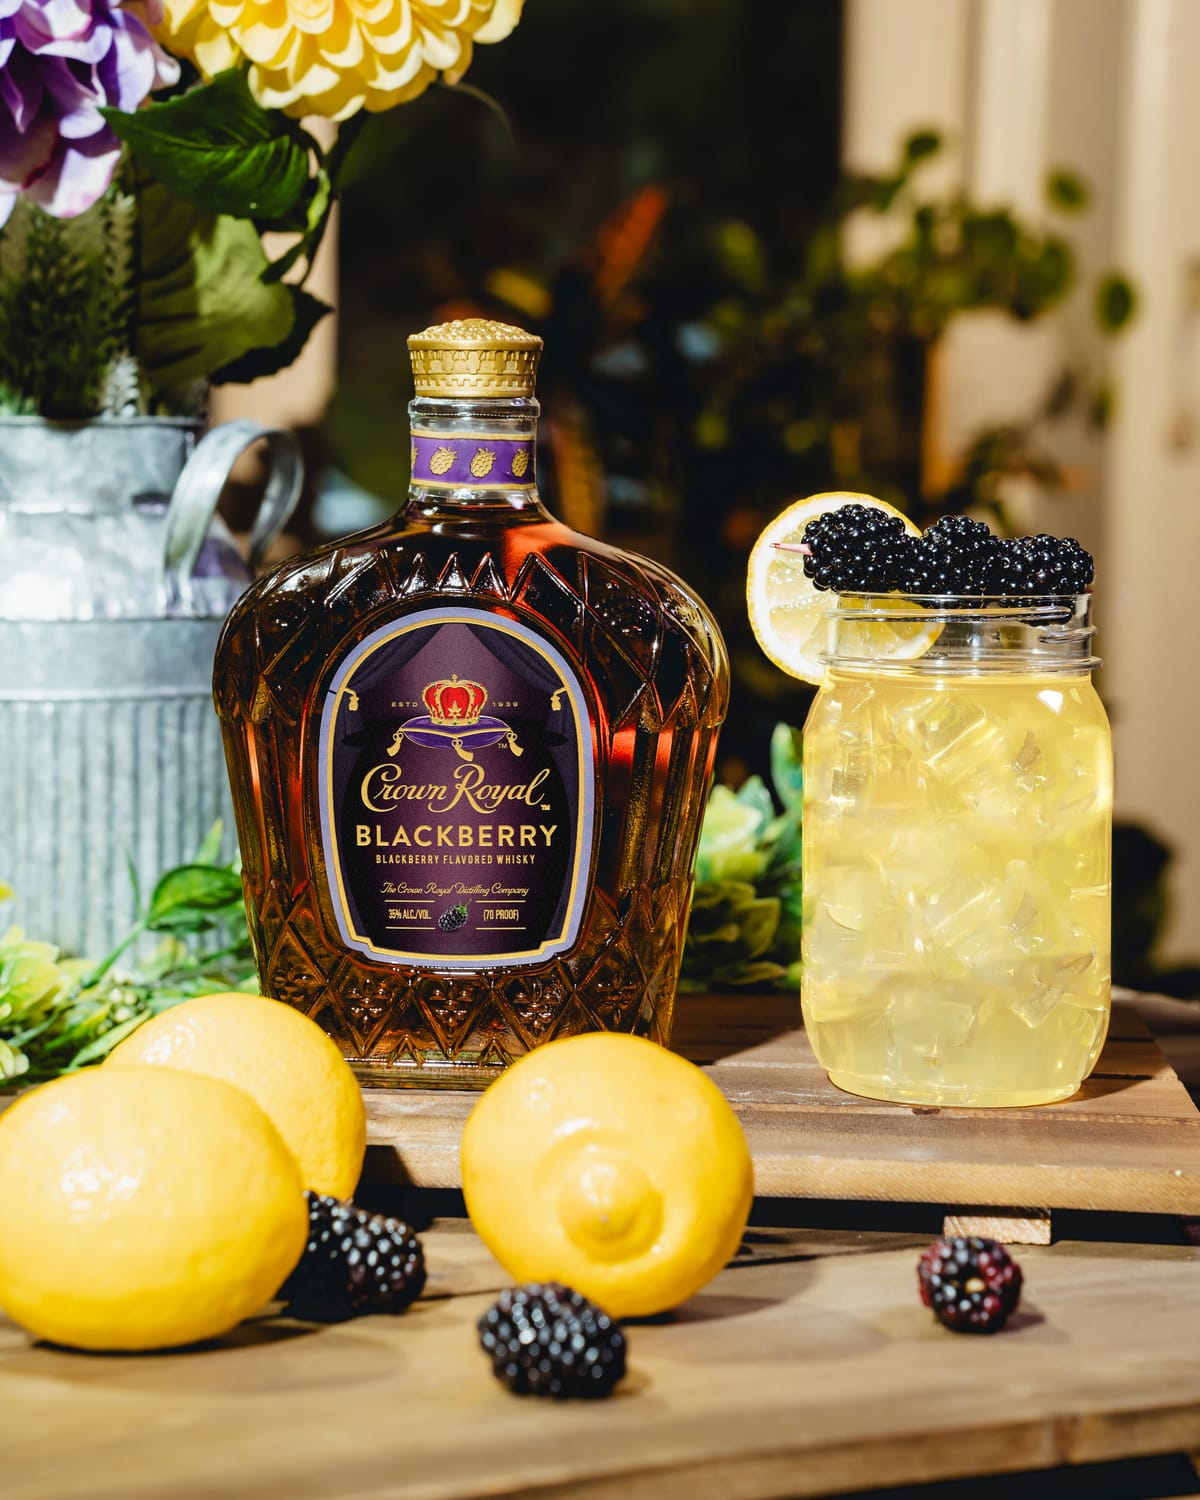 Crown Royal Launches  Blackberry Flavored Whisky